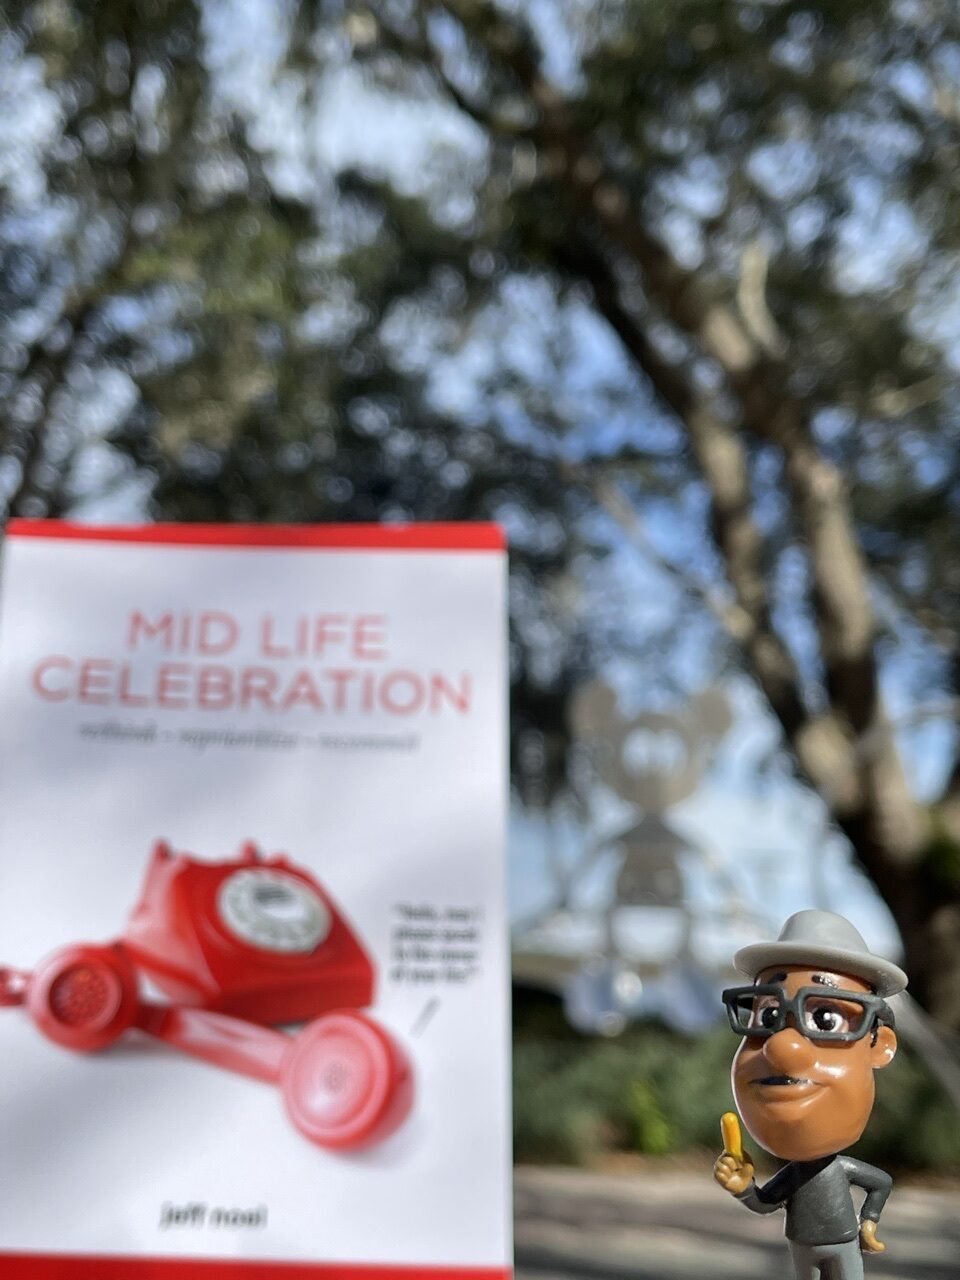 The book Mid Life Celebration with a couple of Pixar soul small toy characters